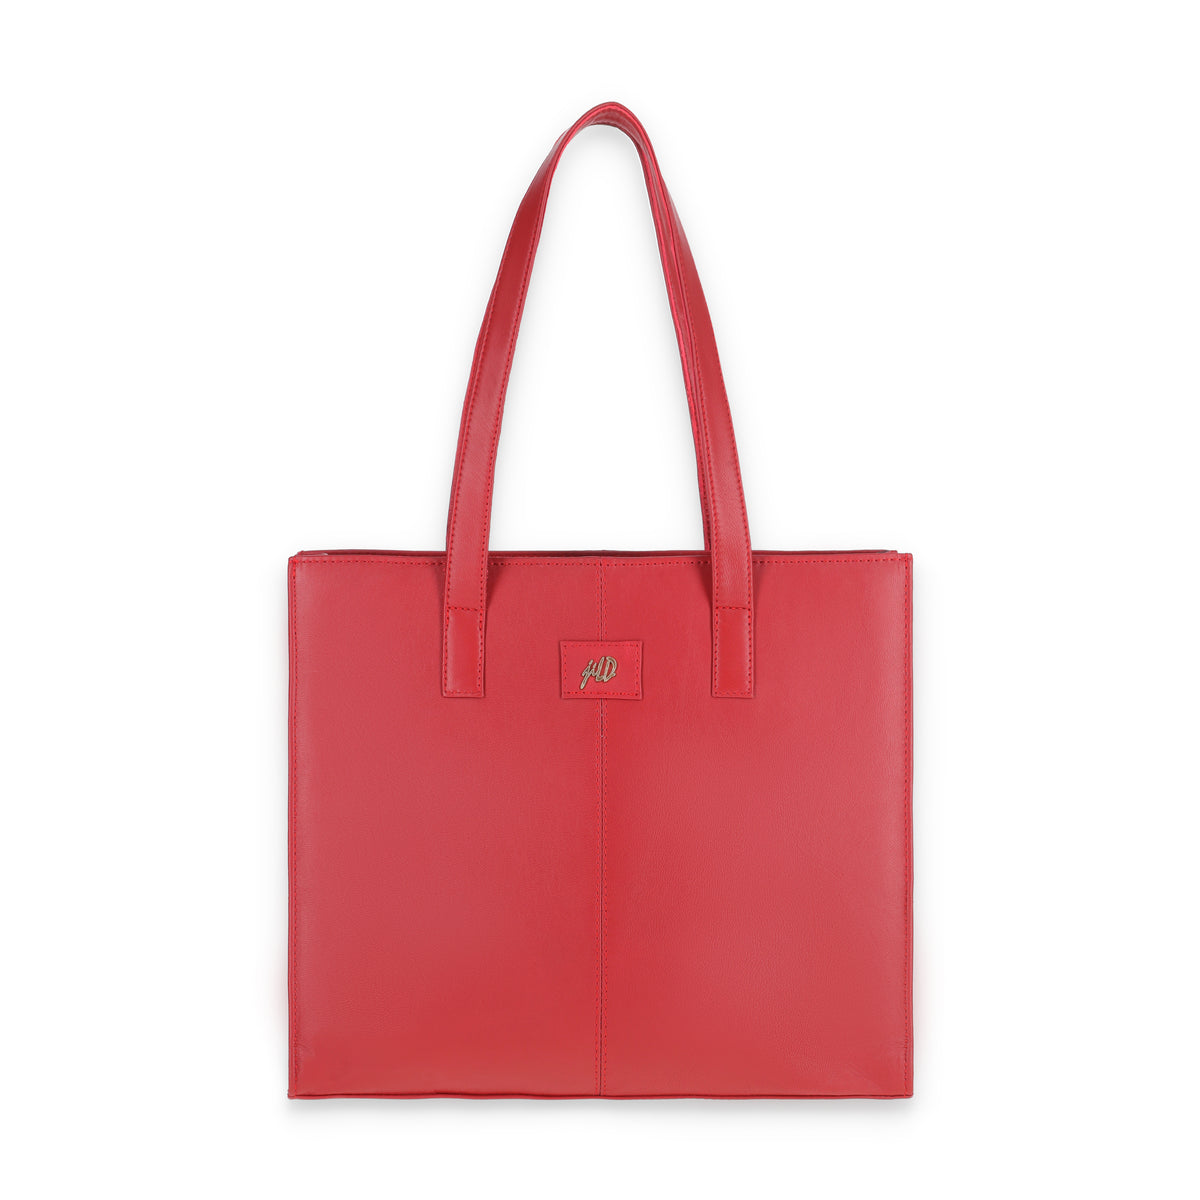 Everyday Women's Candy Red Leather Zipper Tote Bag